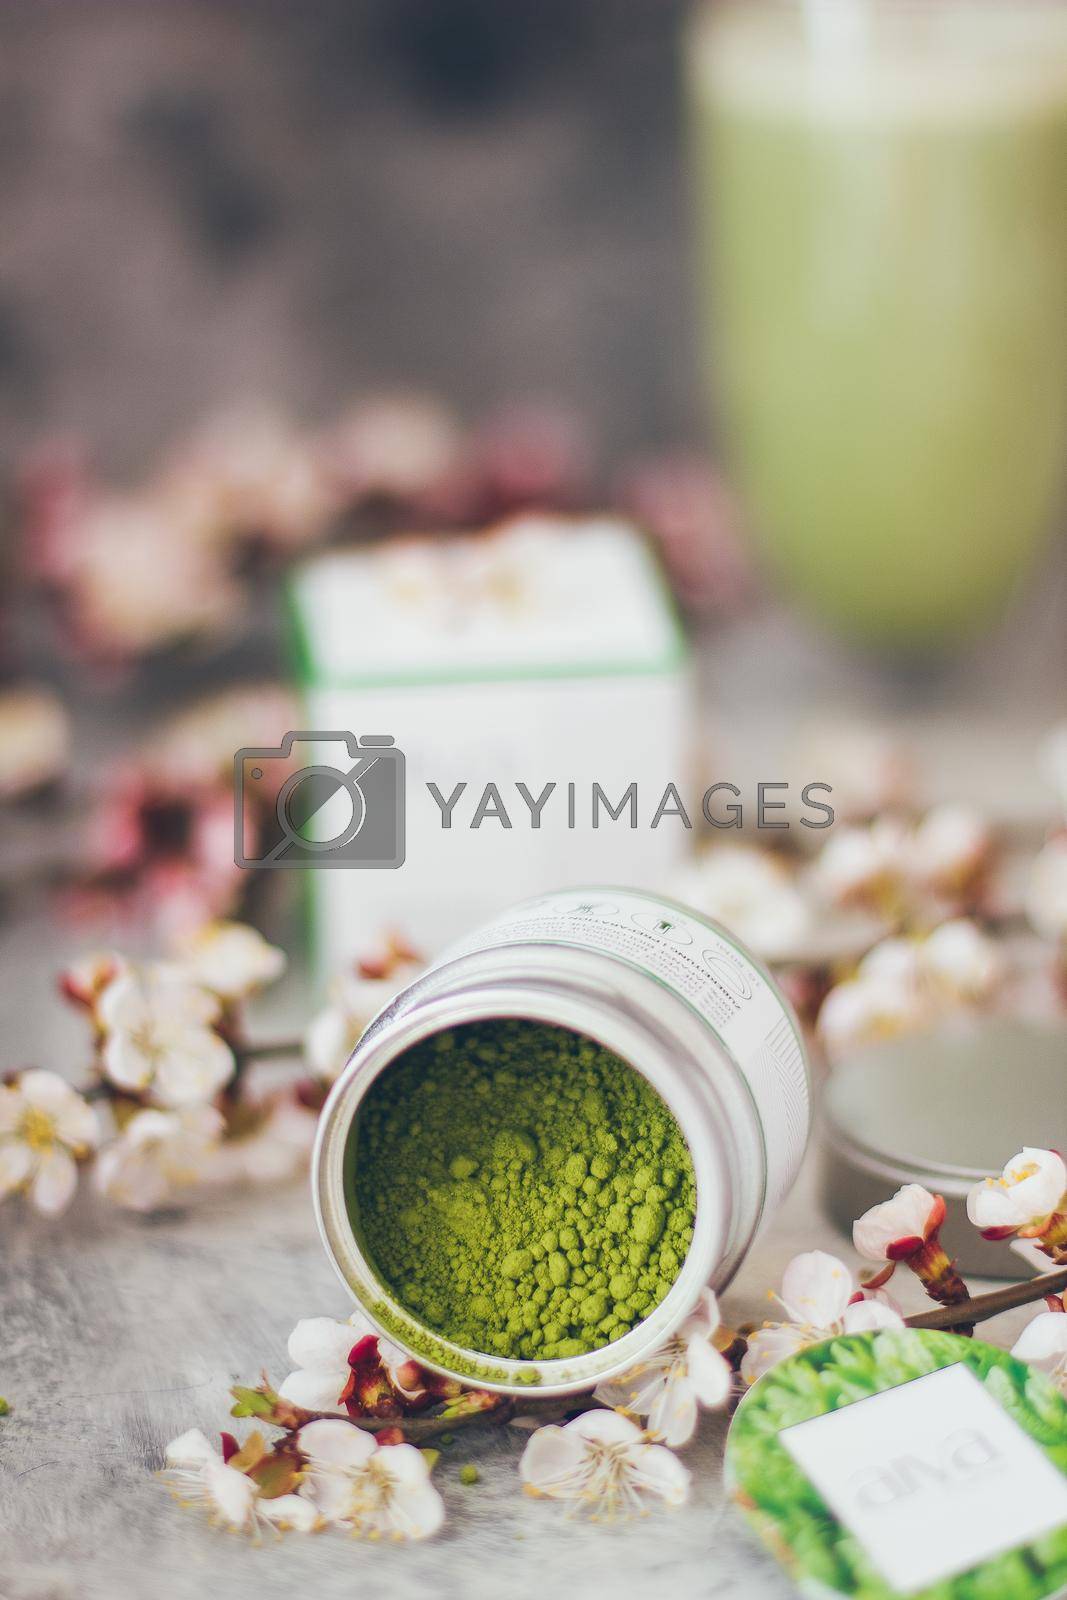 Royalty free image of Matcha tea powder with brunch of cherry blossoms by mmp1206